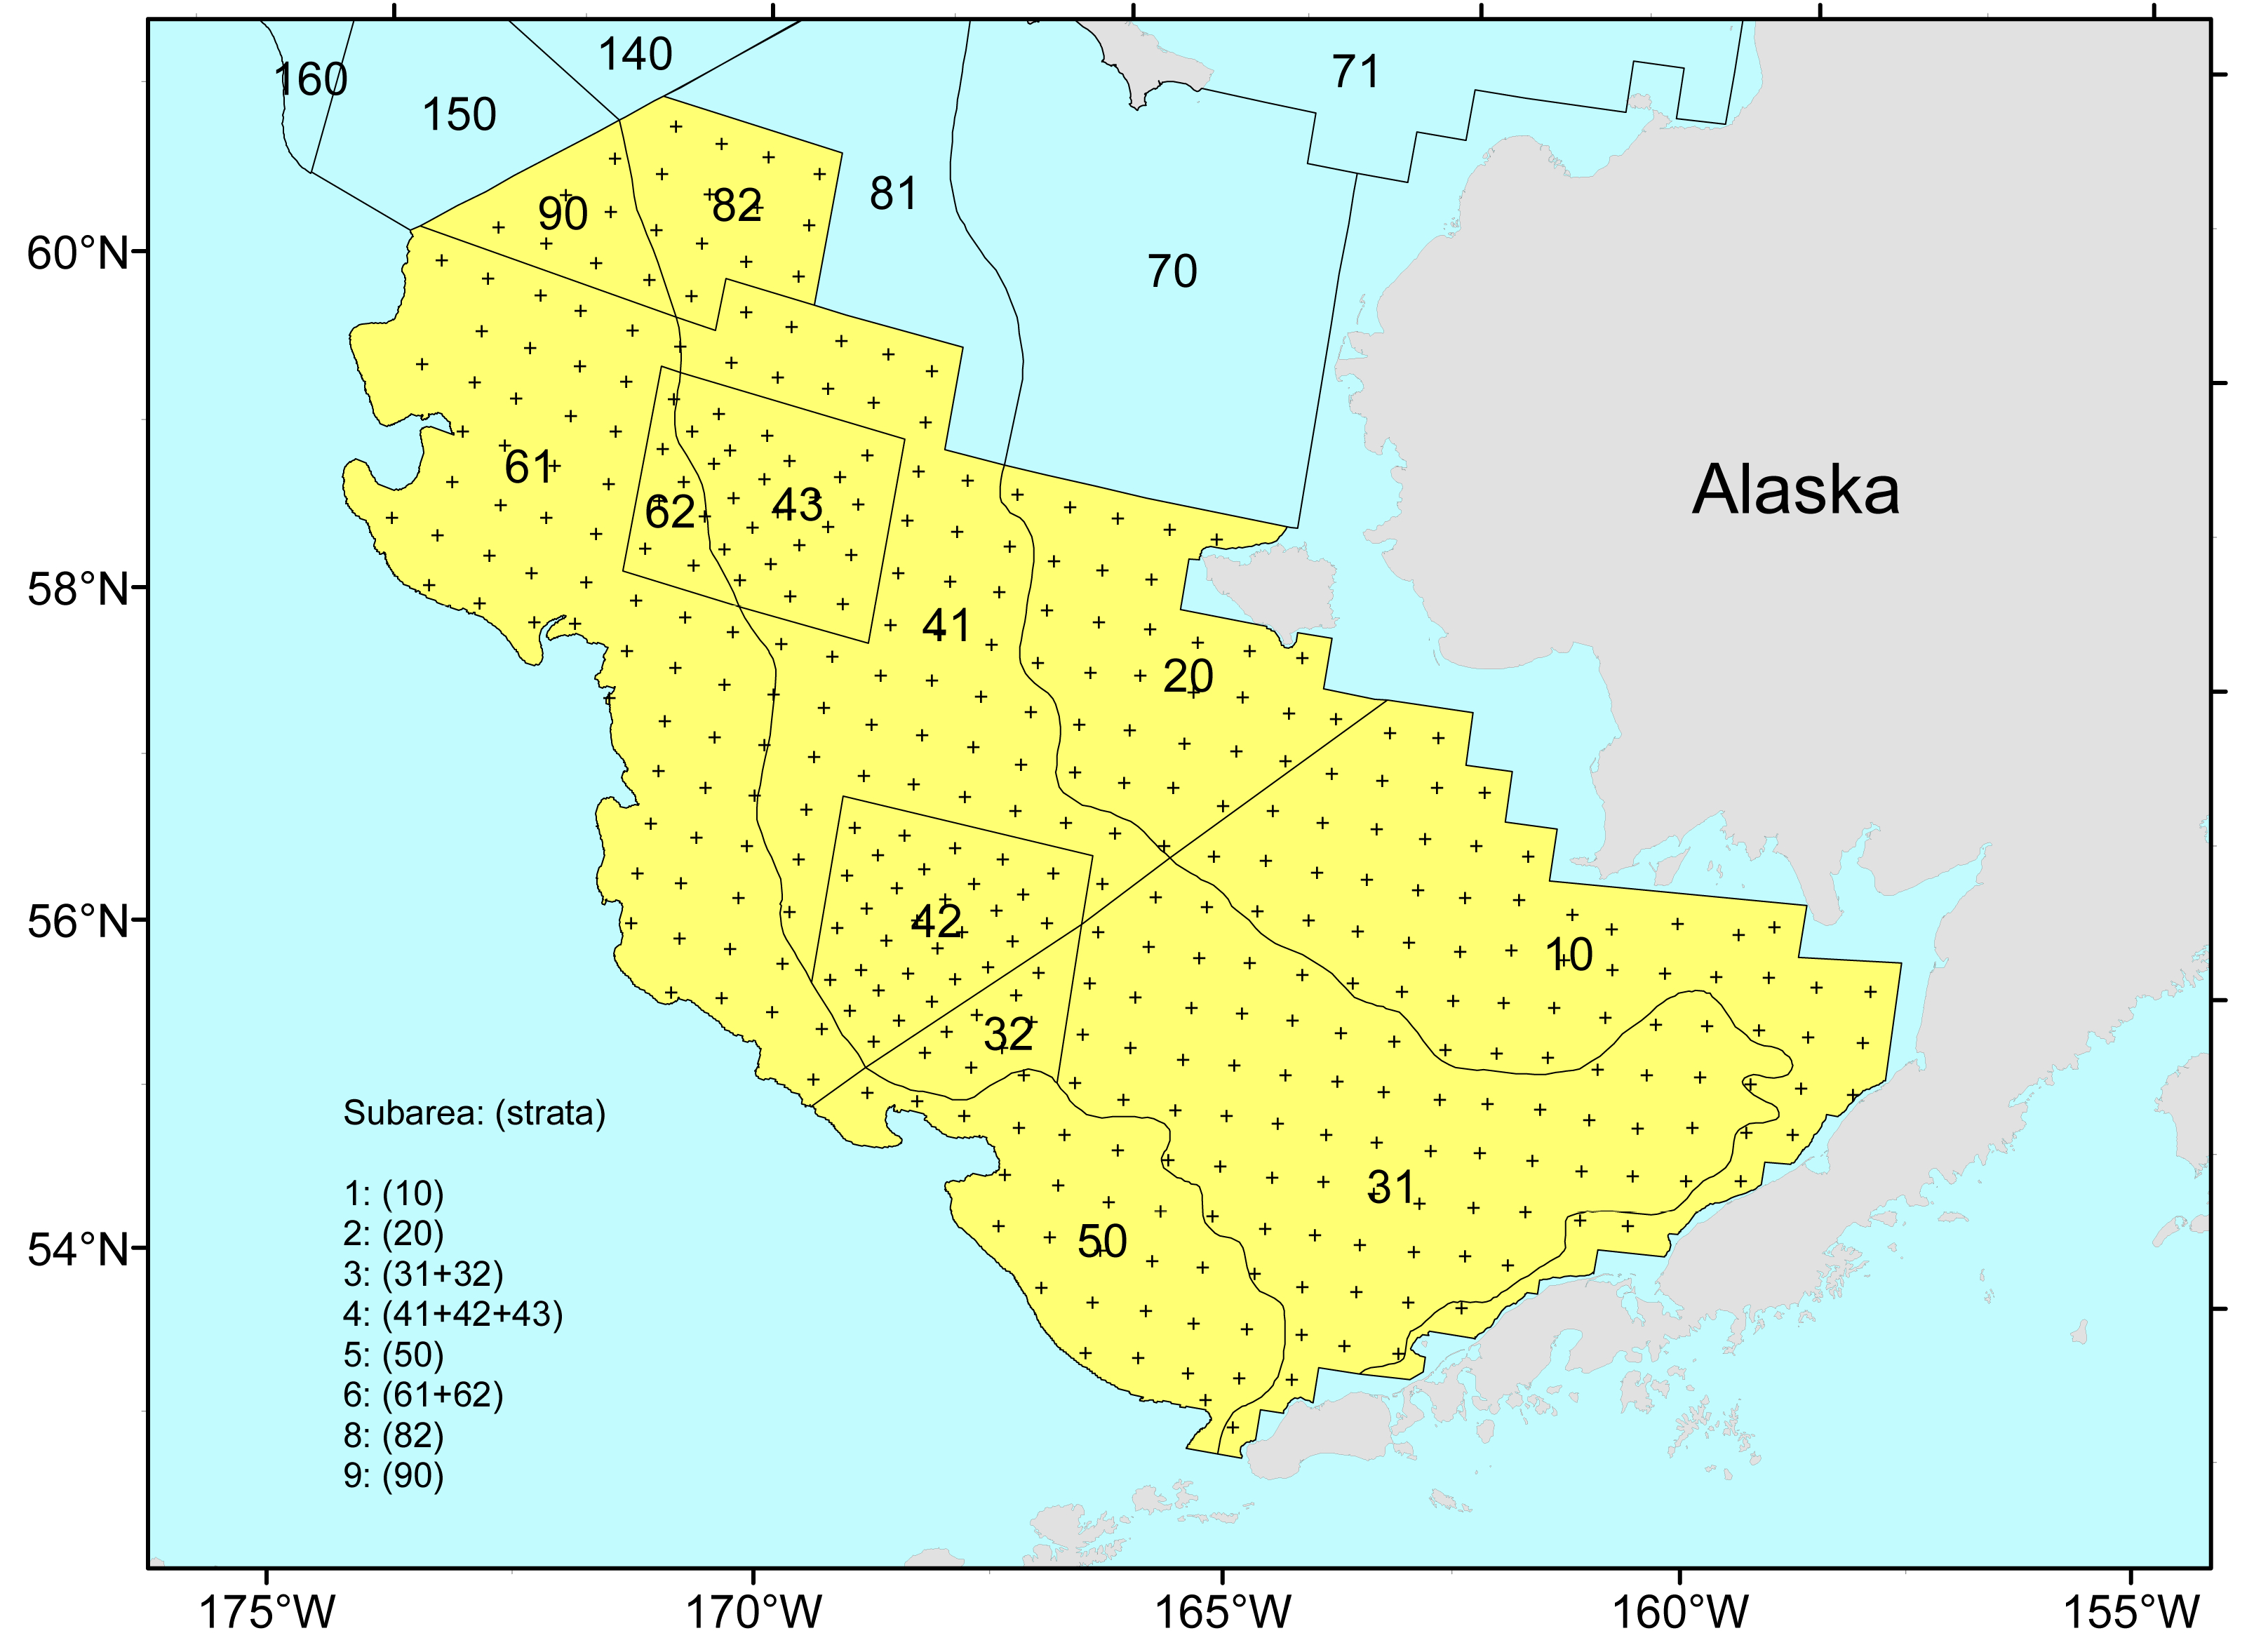 Easter Bering Sea stratum map showing strata 10, 20, 31-32, 41-43, 50, 61-62m 82, and 90.